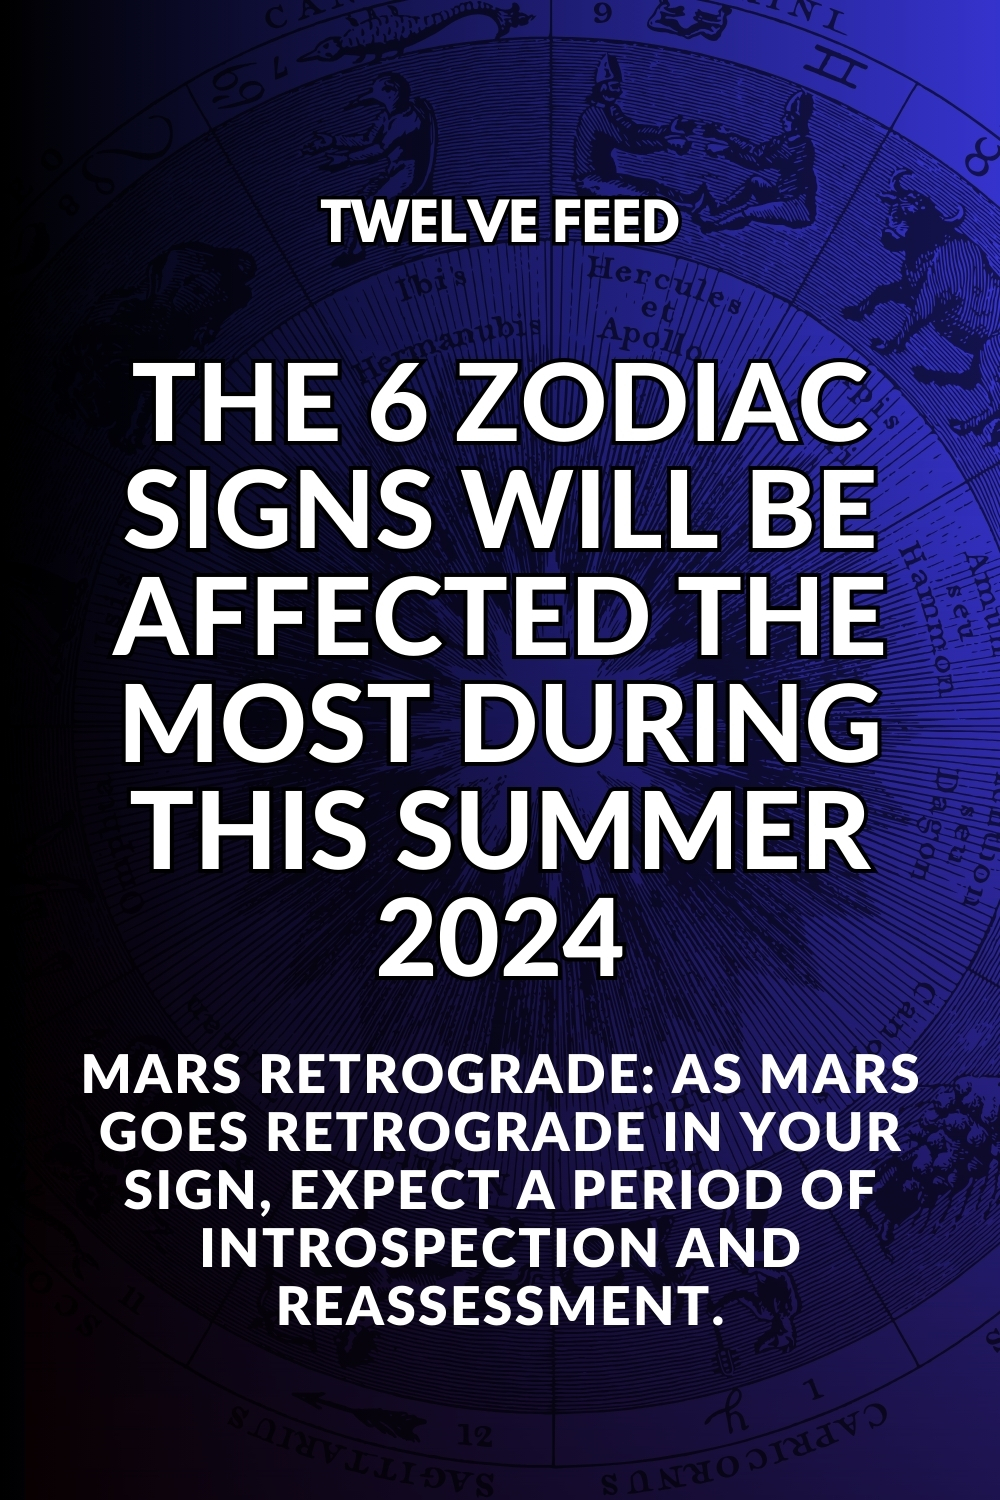 The 6 Zodiac Signs Will Be Affected The Most During This Summer 2024